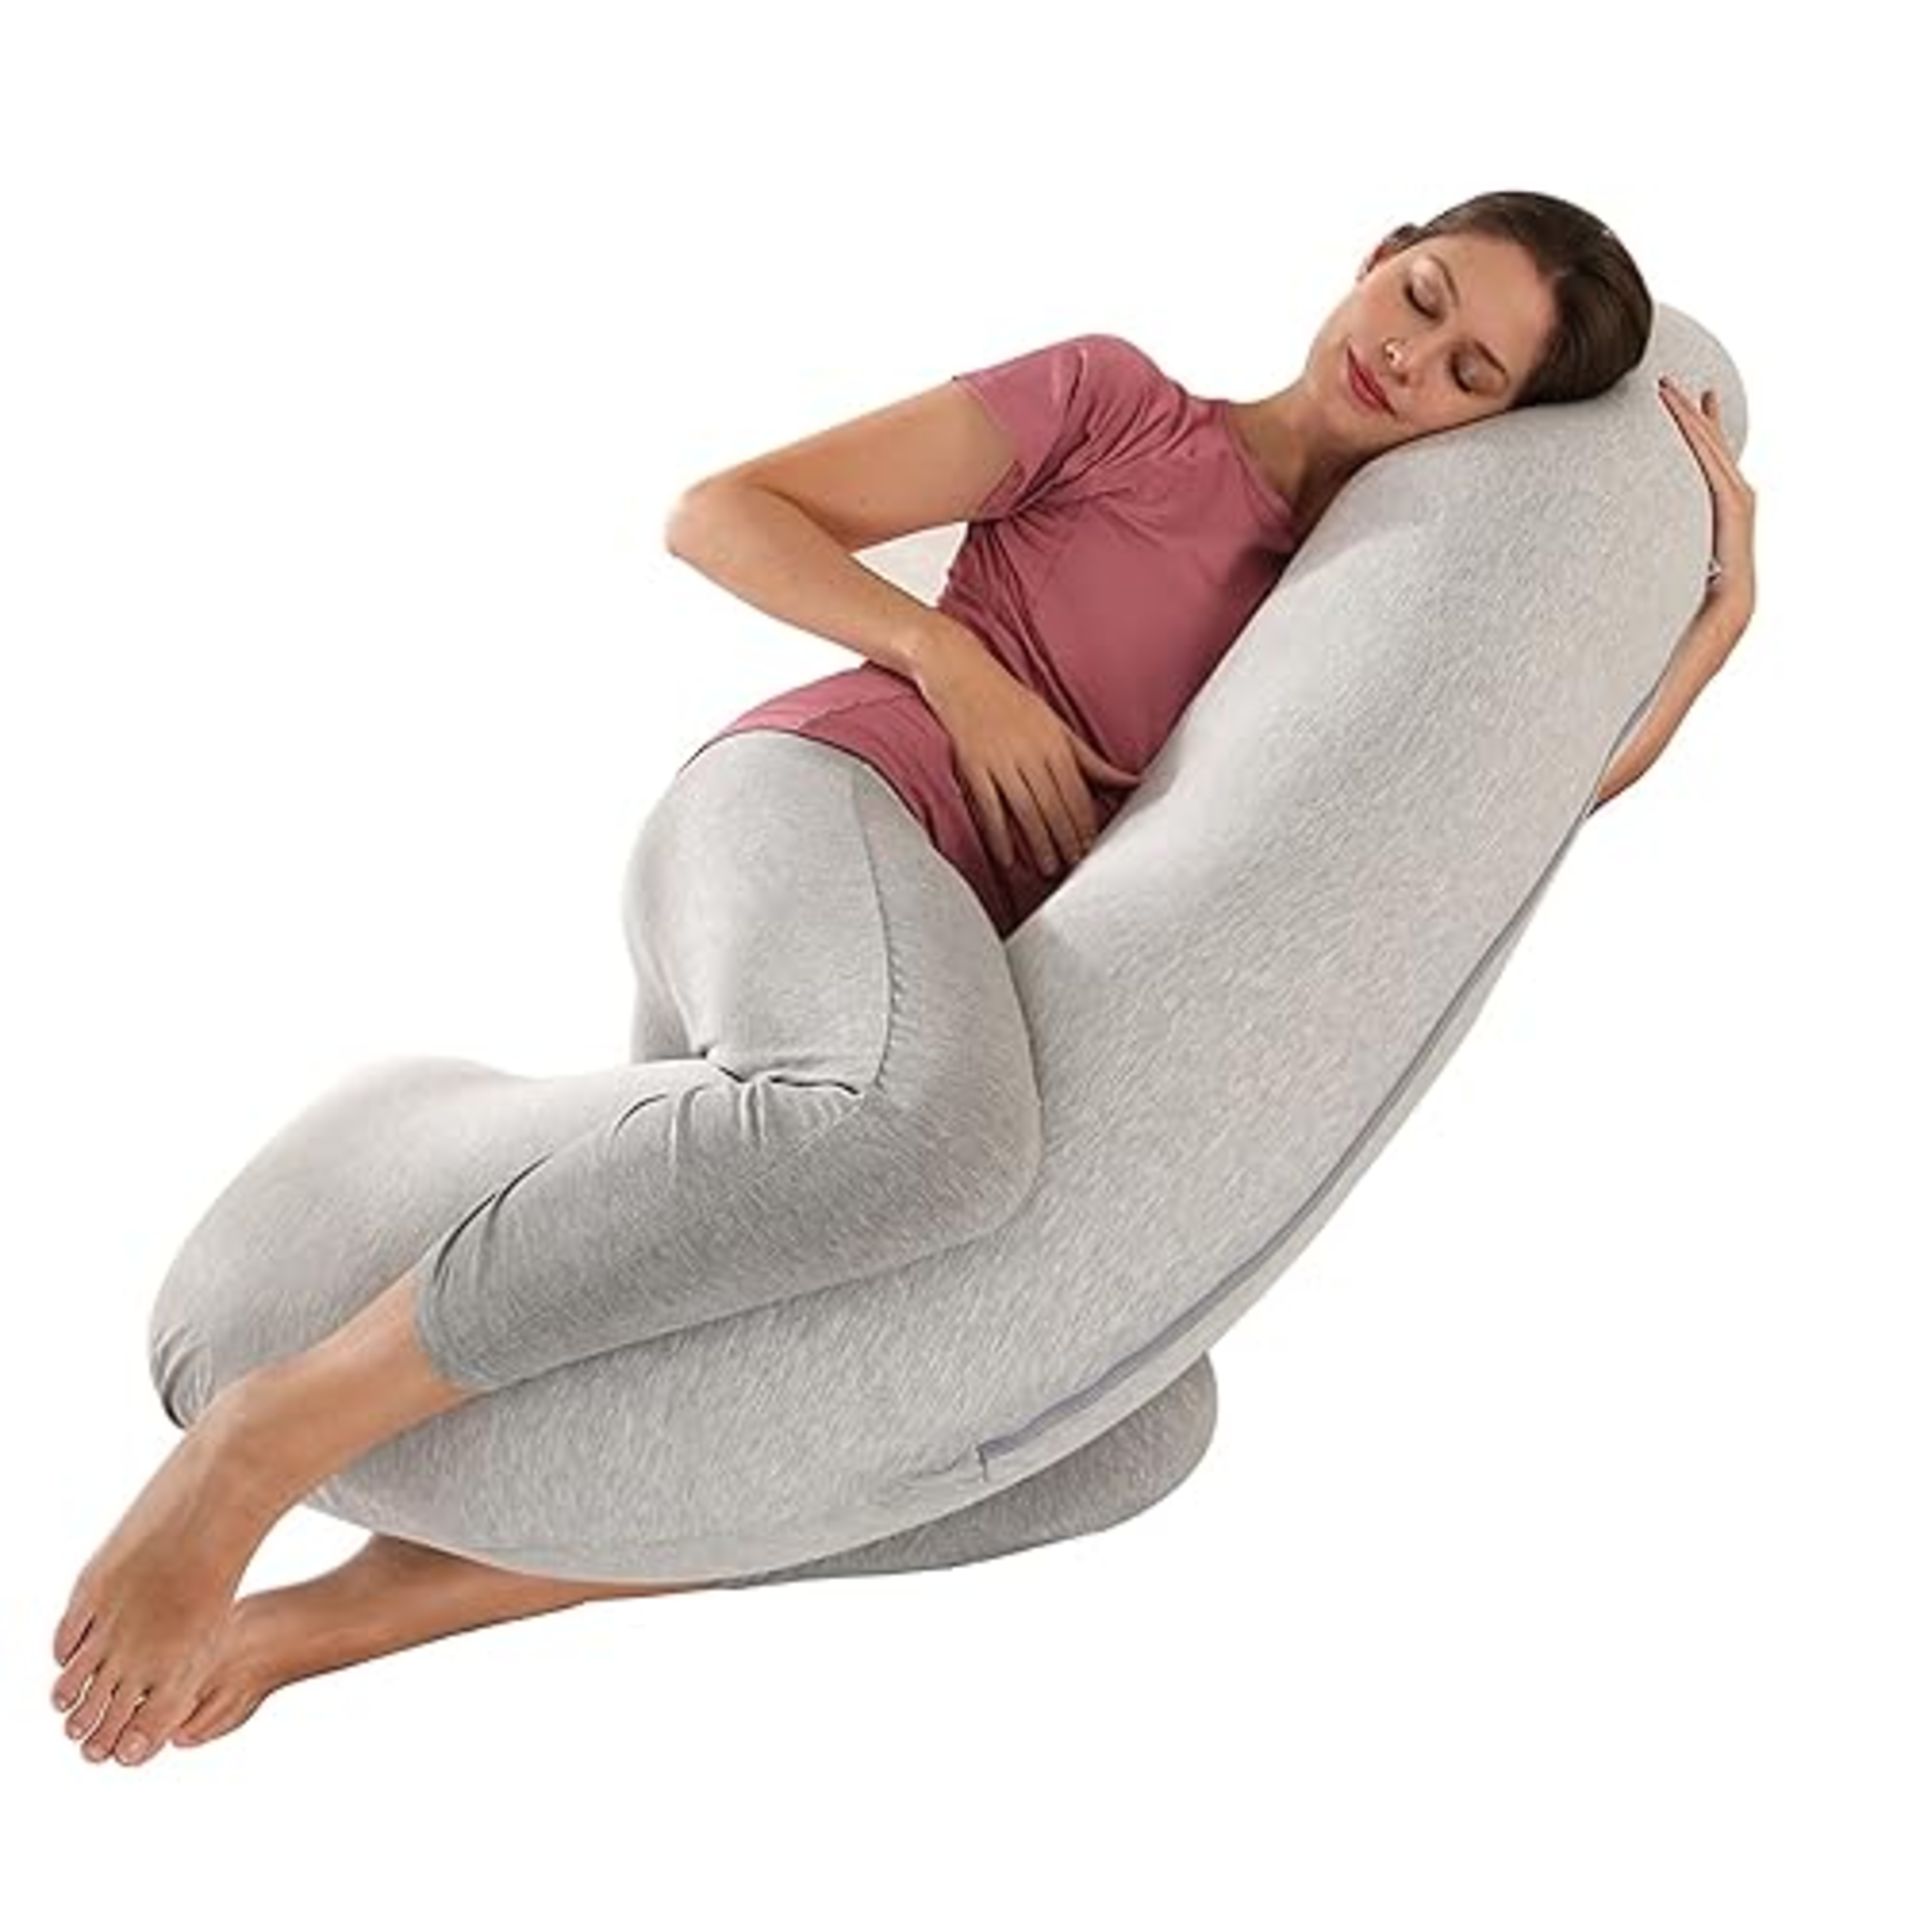 Wndy's Dream L shaped Support Pillow| Pregcy Body Pillow with Premium Cotton Filling for Sports Rec